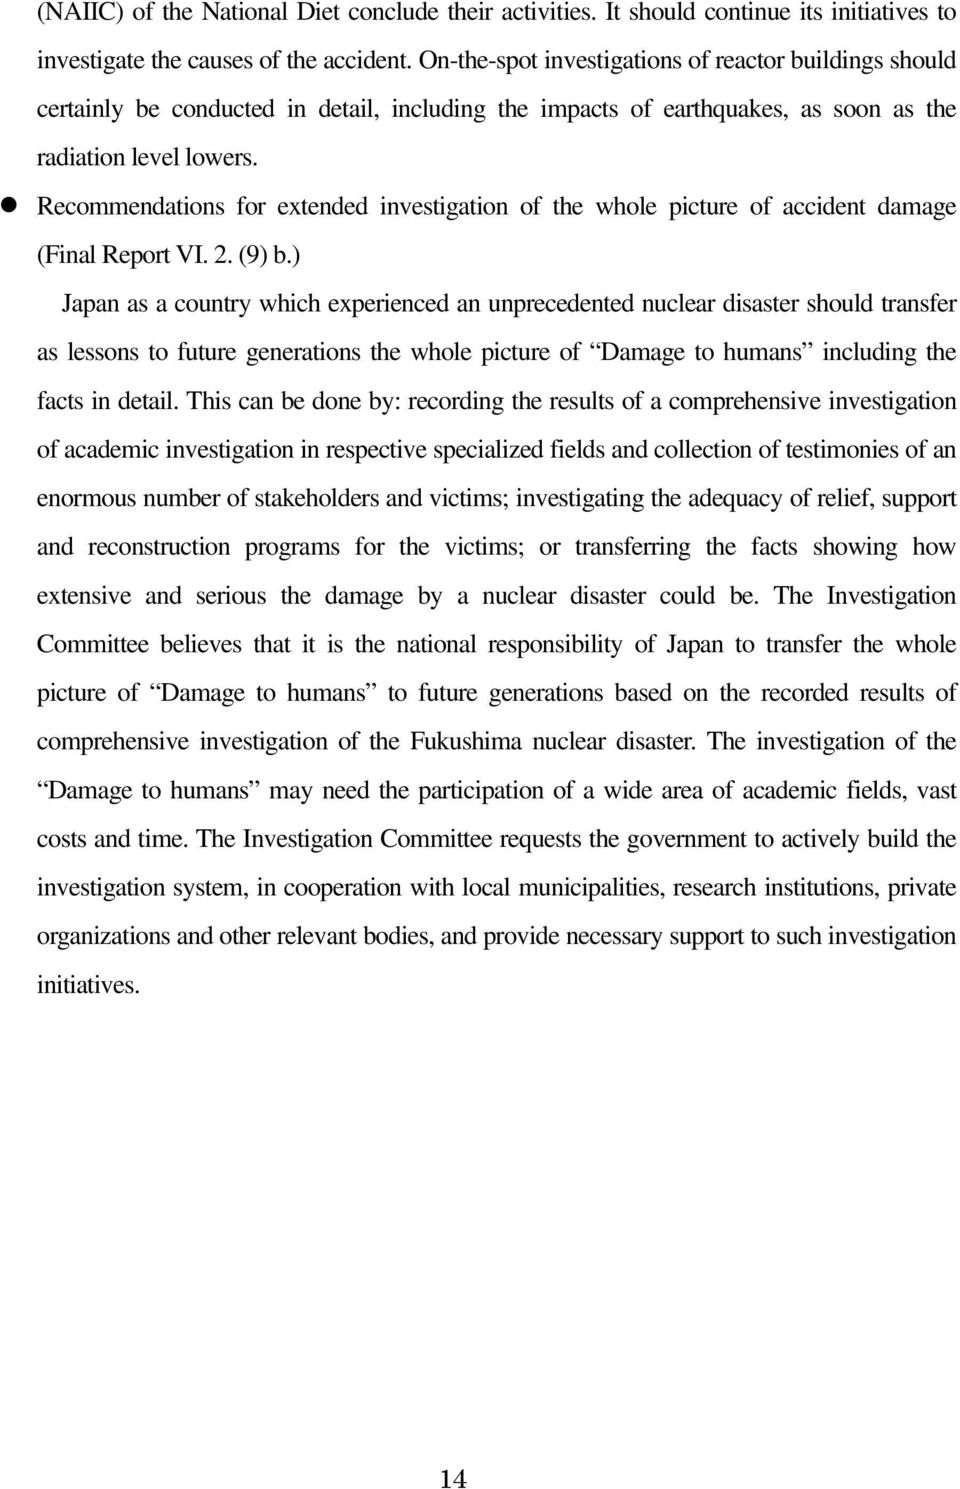 Recommendations for extended investigation of the whole picture of accident damage (Final Report VI. 2. (9) b.